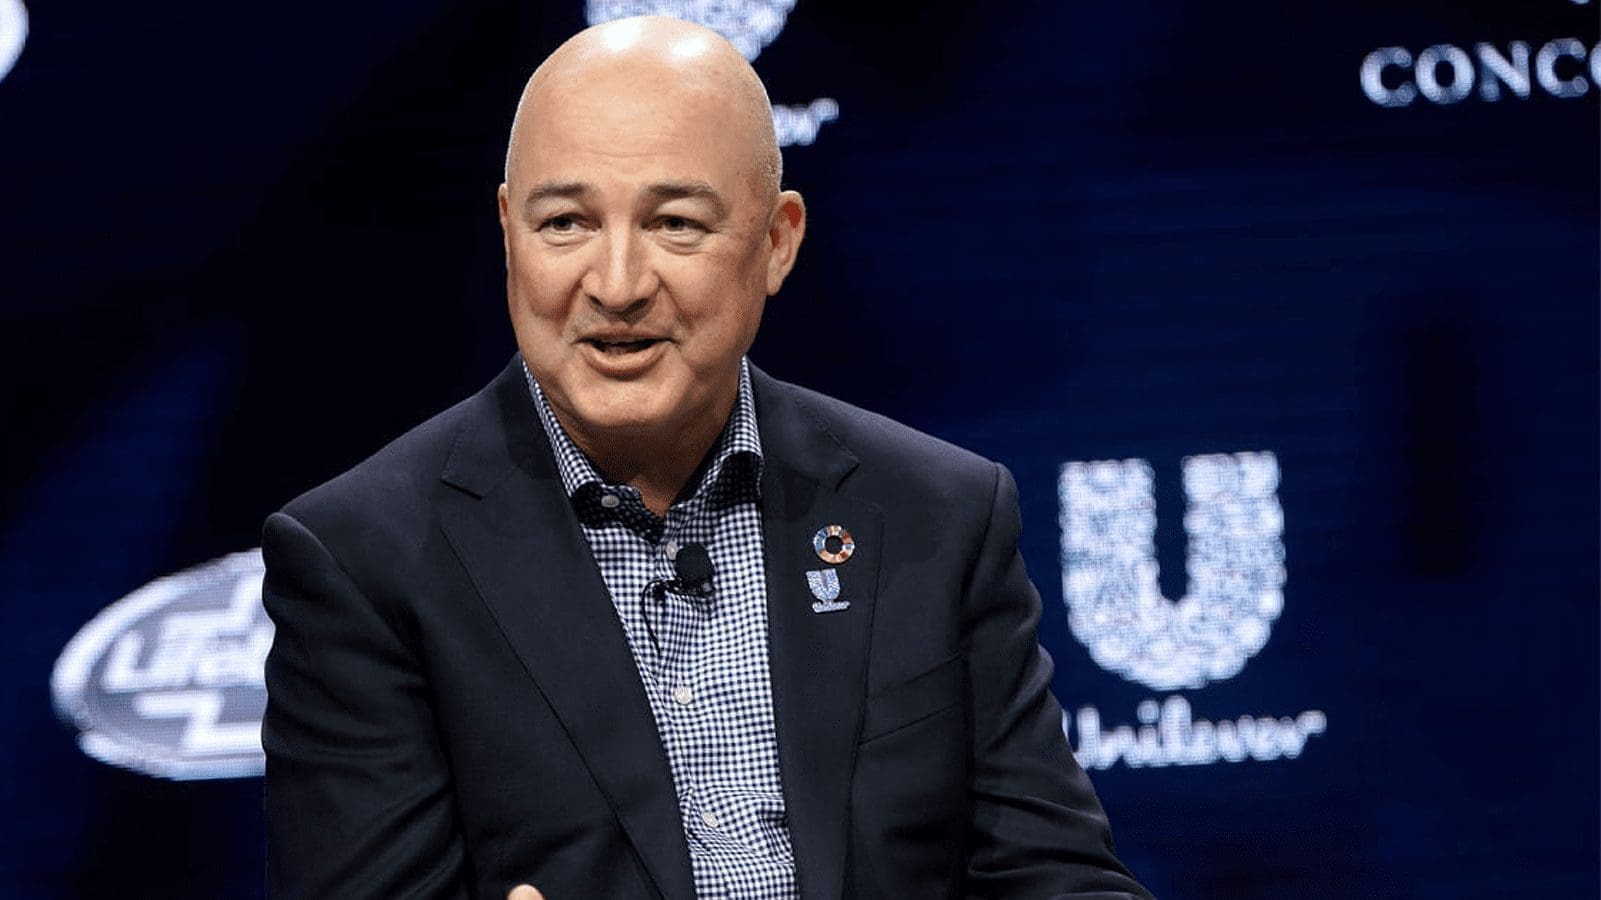 Befitting sendoff: Unilever’s annual turnover exceeds US$64B in Alan Jope’s last year as CEO